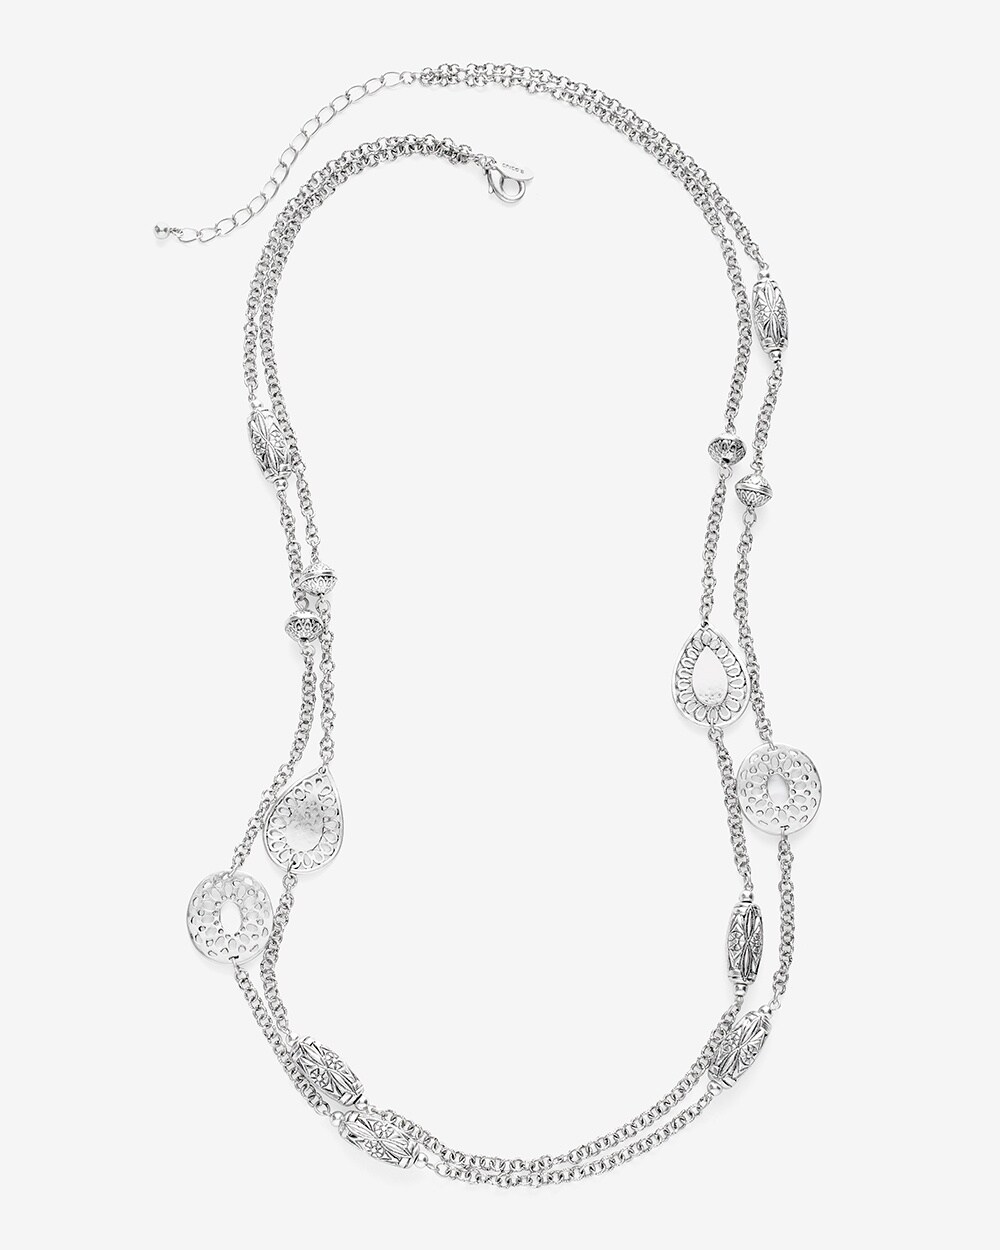 Silver-Tone Textured Double-Strand Necklace